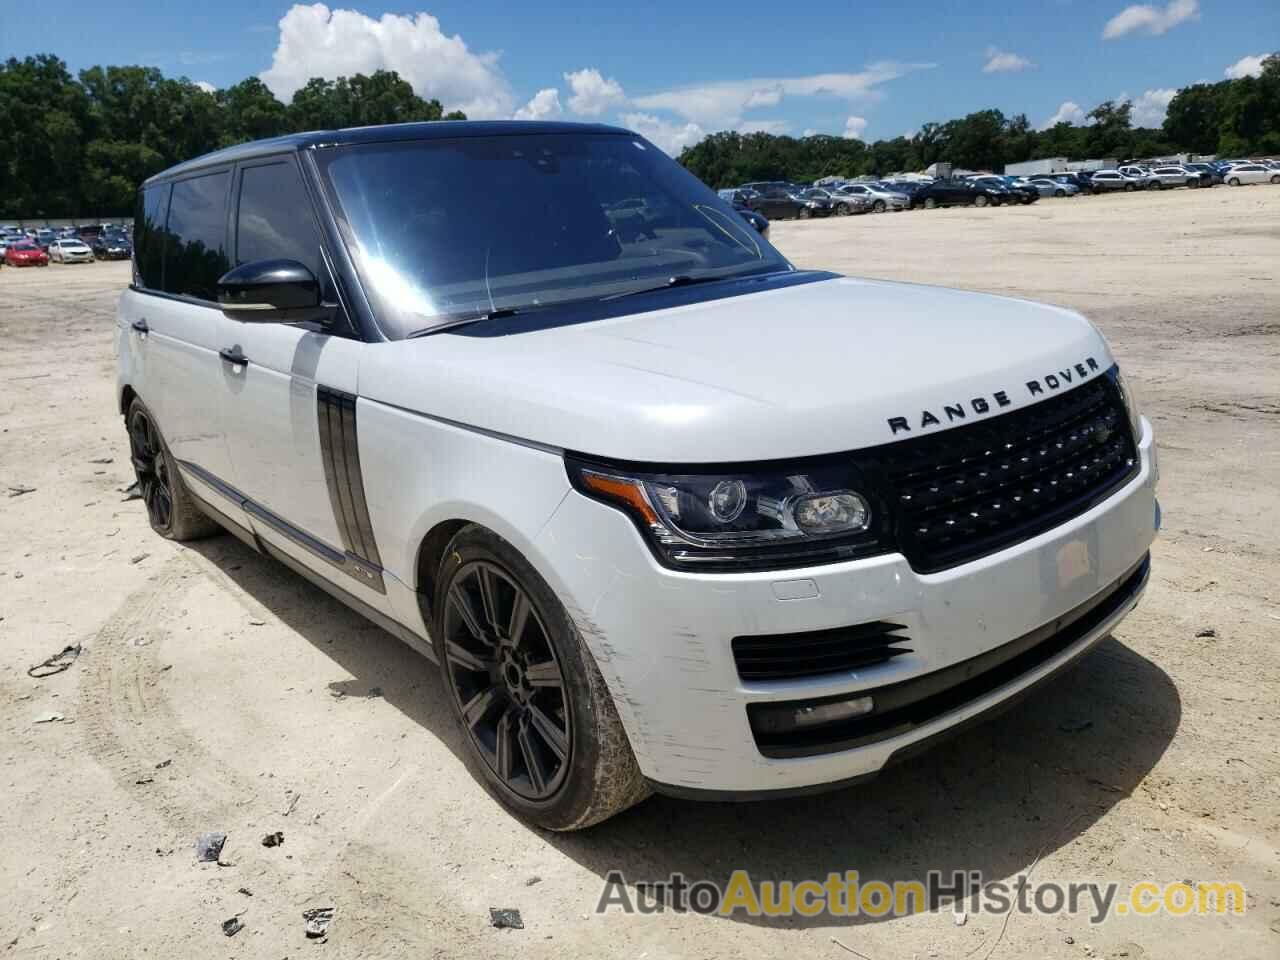 2017 LAND ROVER RANGEROVER SUPERCHARGED, SALGS5FE8HA339466